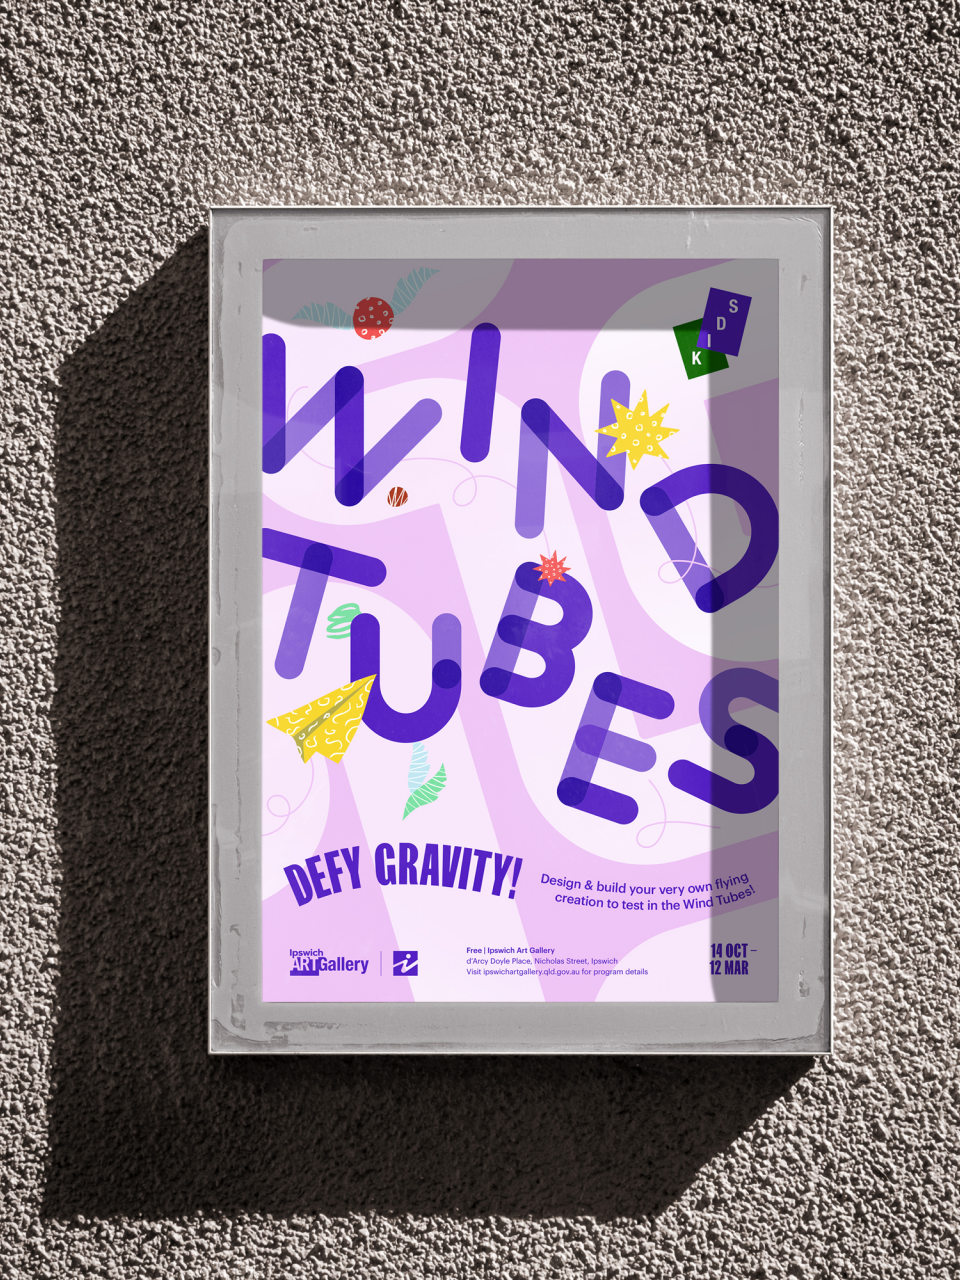 Playful, colourful poster designed for the kids exhibition